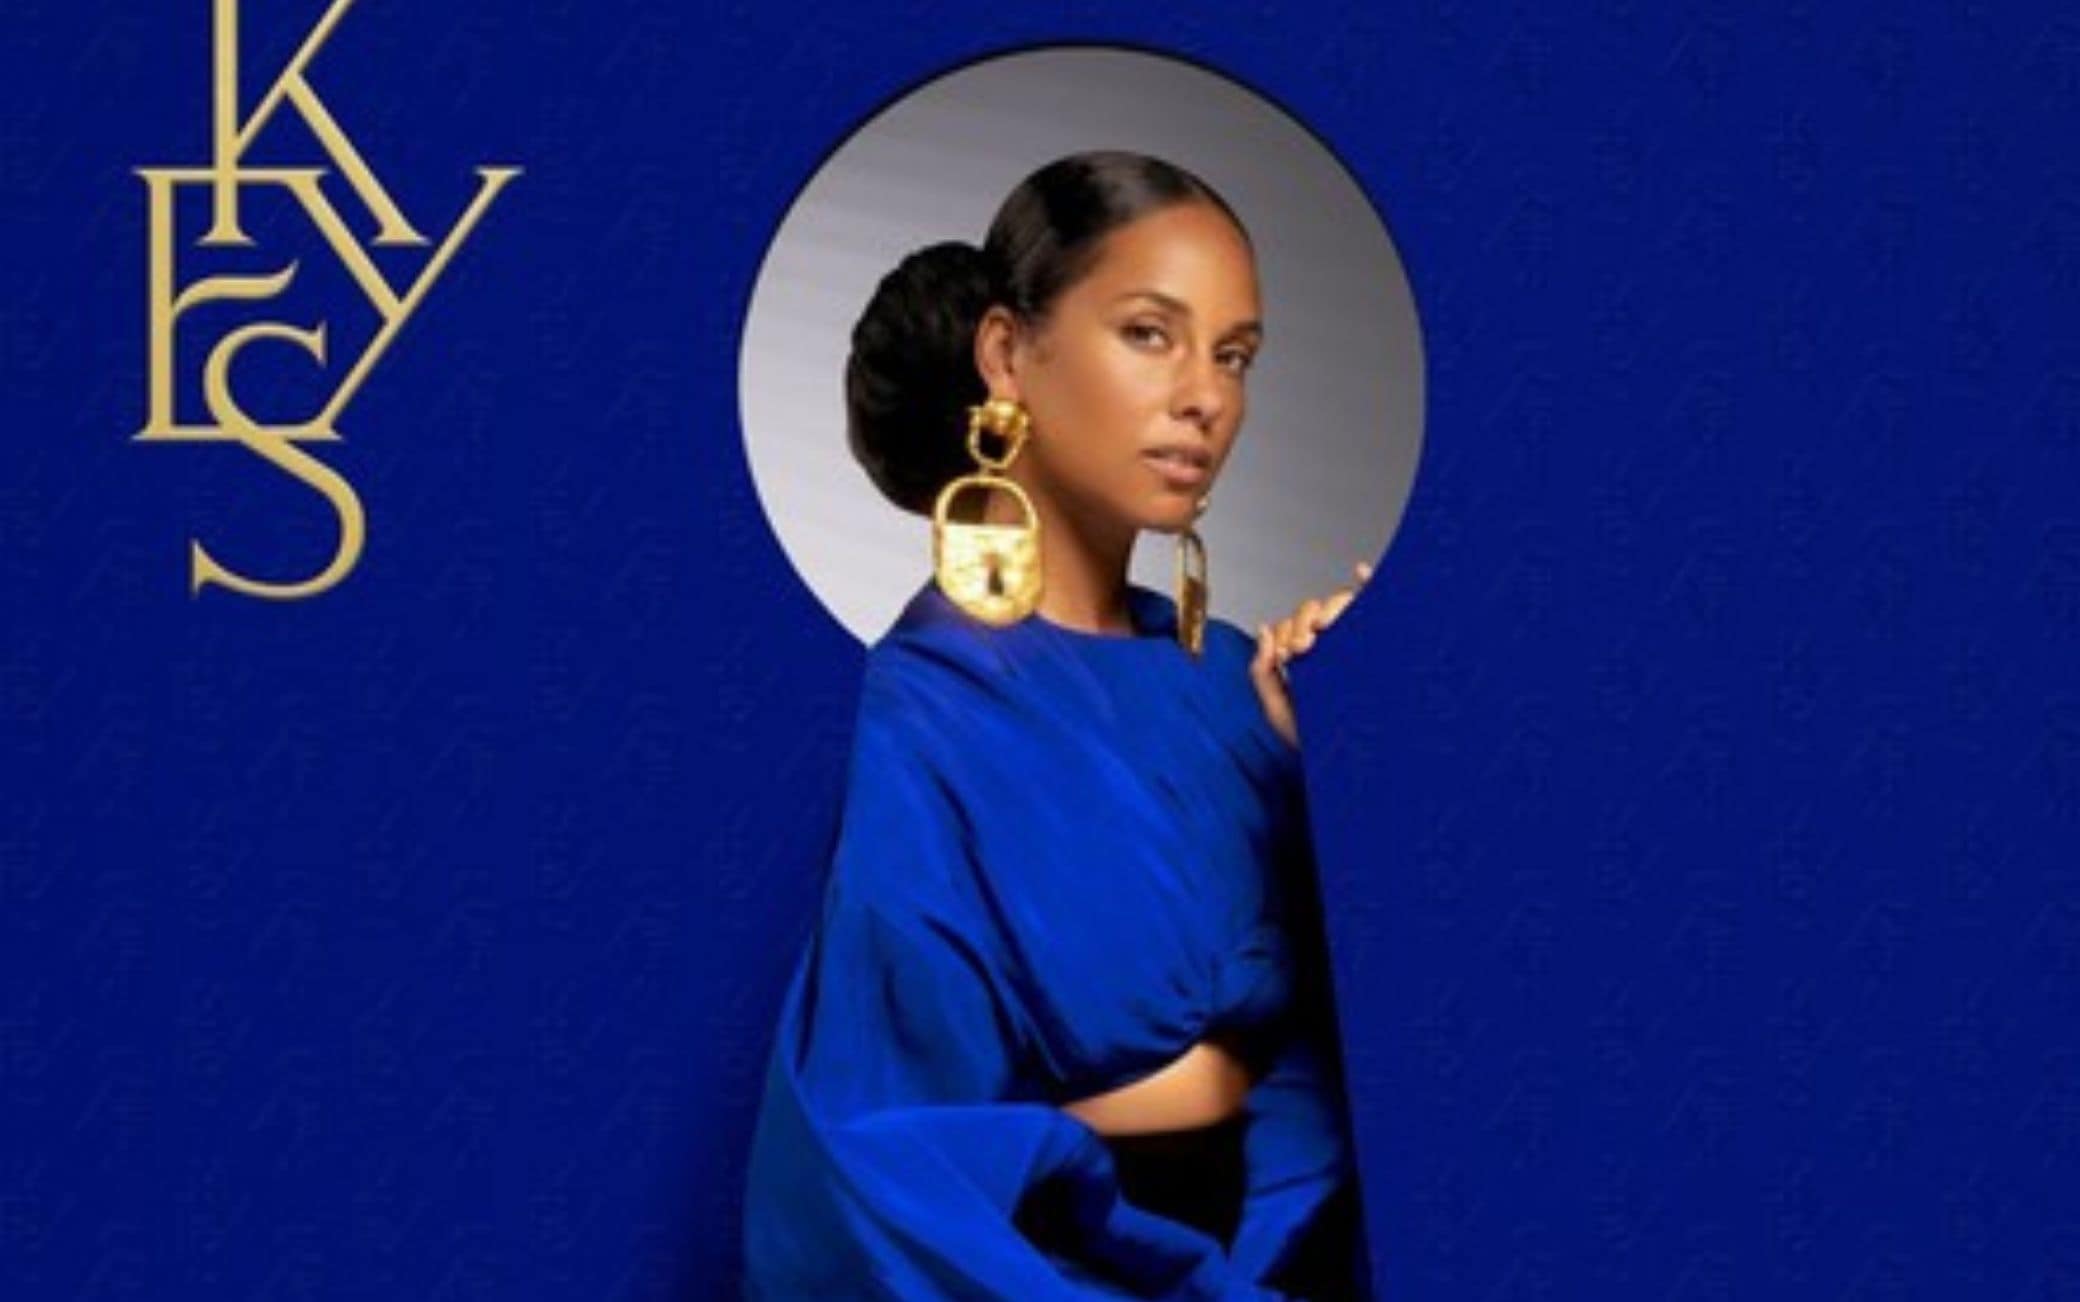 Alicia Keys, unveiled the tracklist of the new album